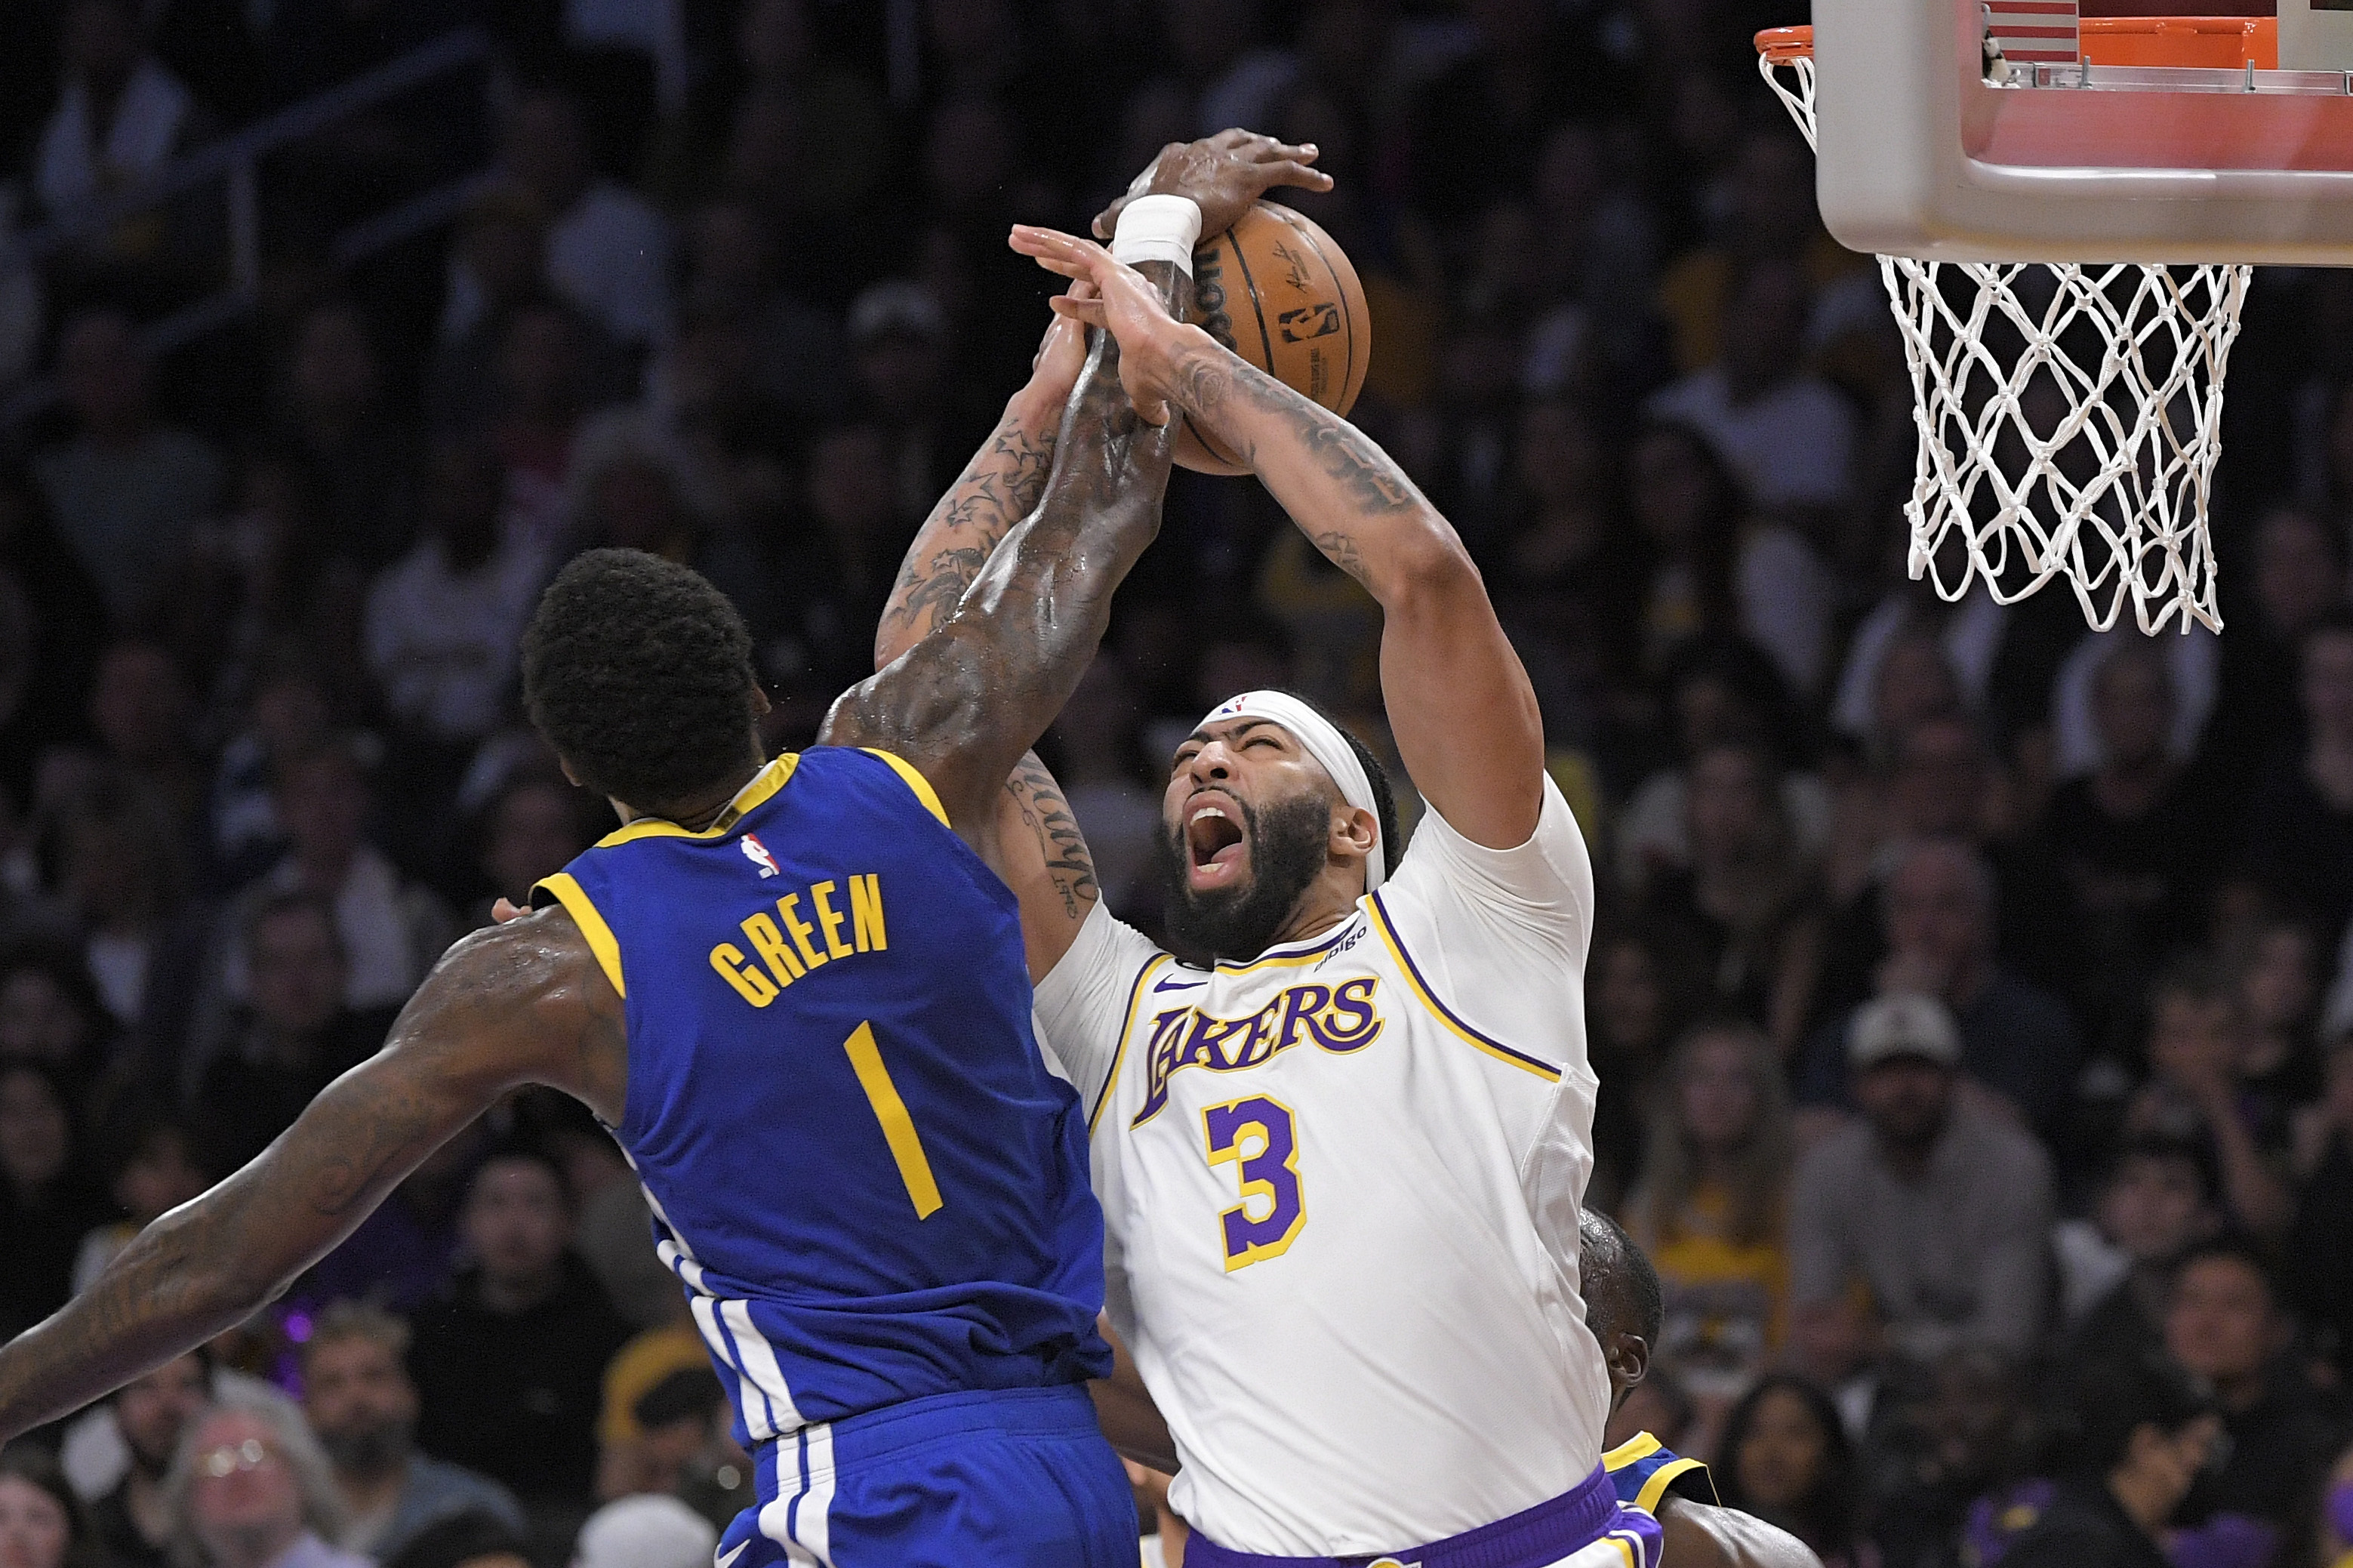 Lakers vs. Warriors live stream: TV channel, how to watch